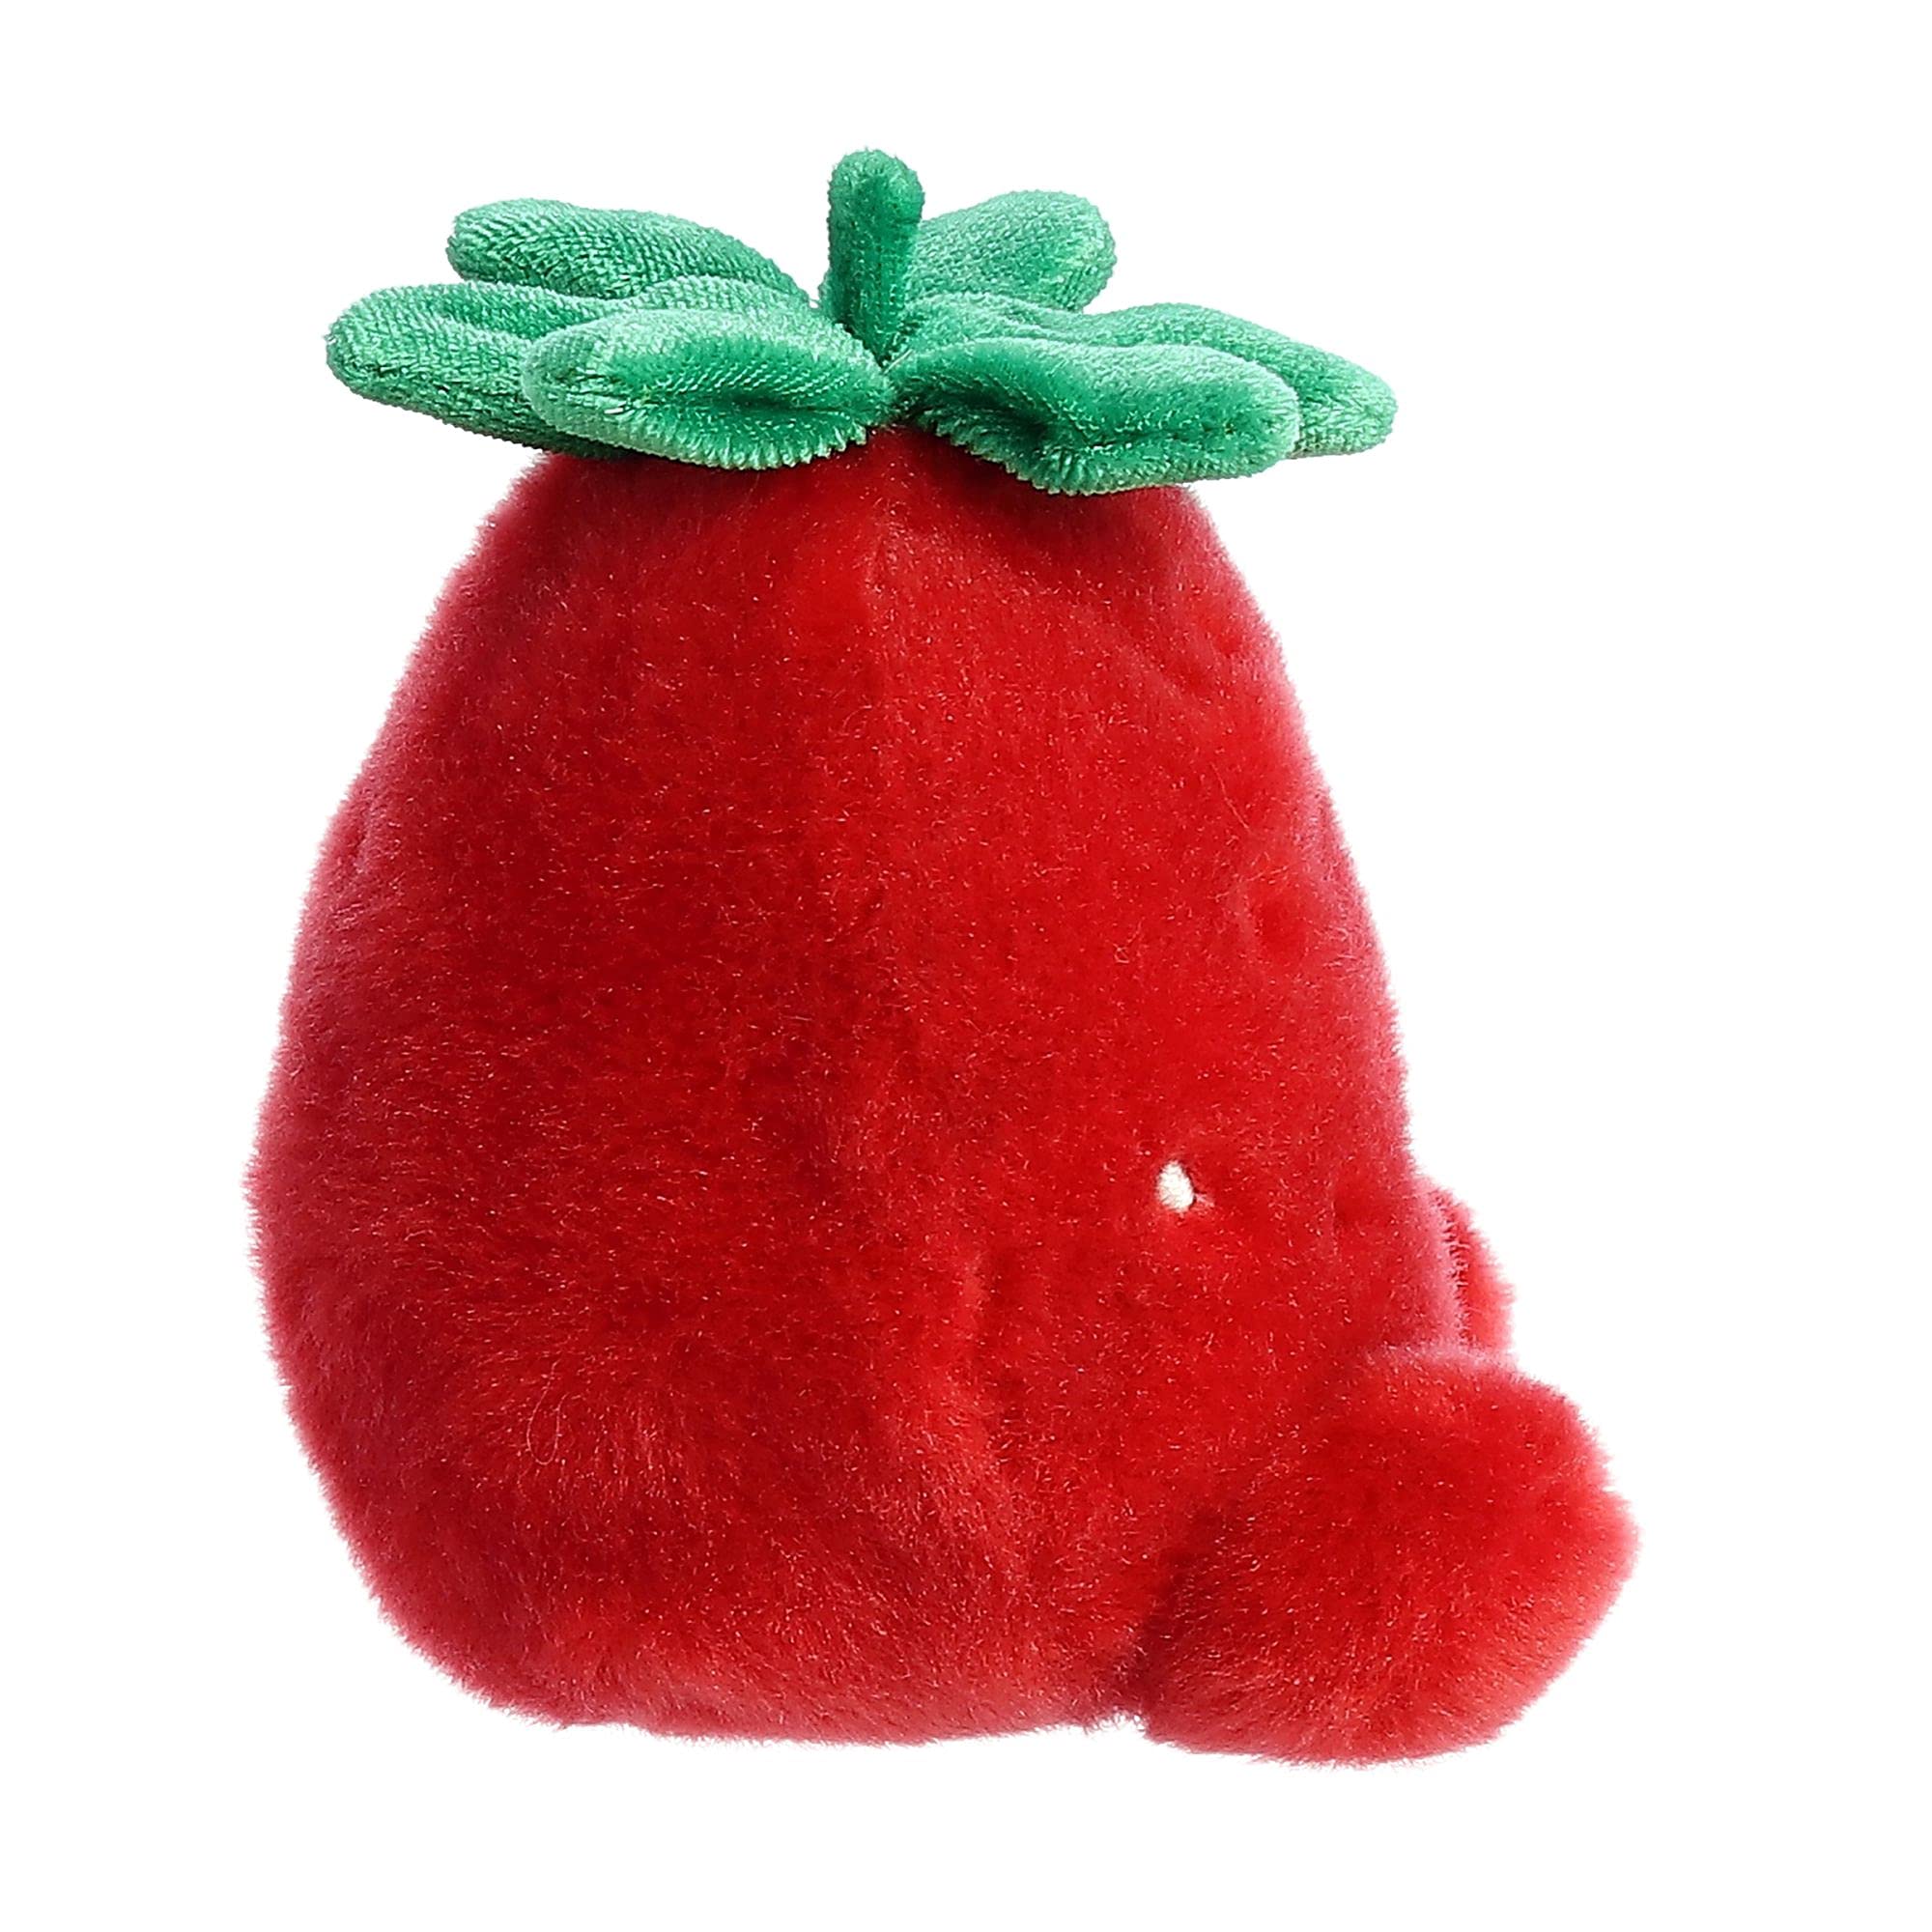 Aurora® Adorable Palm Pals™ Juicy Strawberry™ Stuffed Animal - Pocket-Sized Play - Collectable Fun - Red 5 Inches